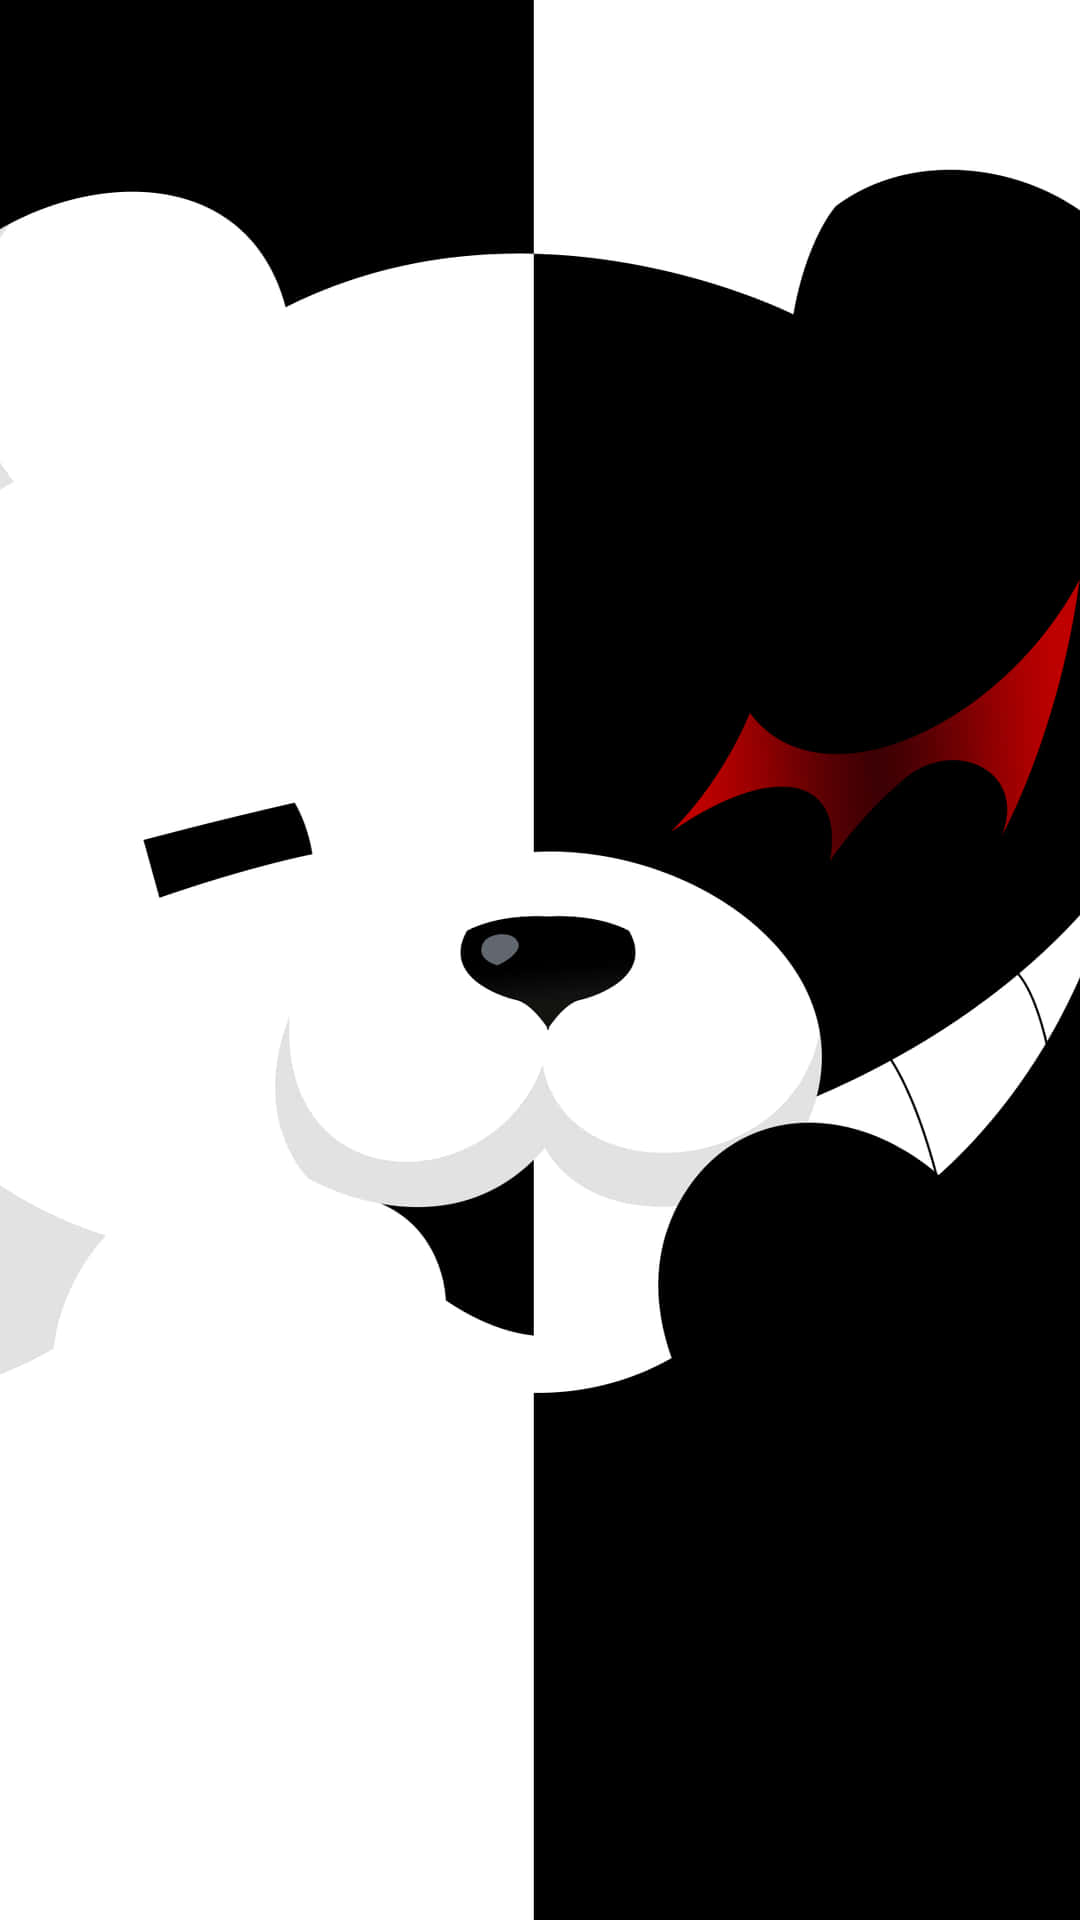 9 Monokuma Wallpapers for iPhone and Android by Allison Patel